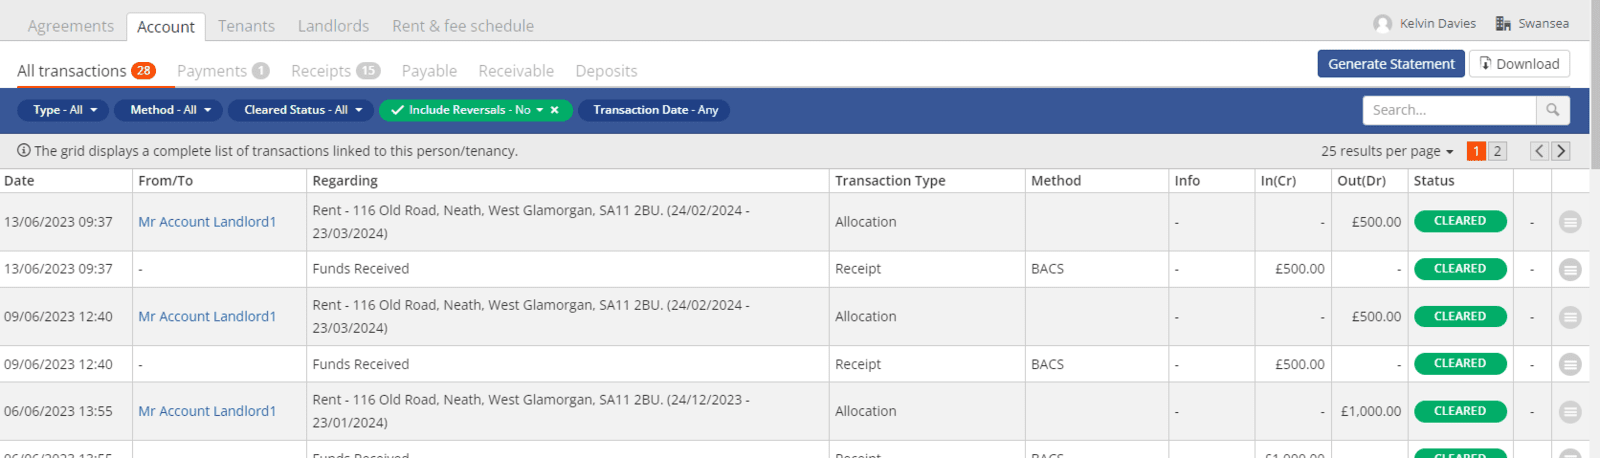 Account tab displaying all transactions grid.